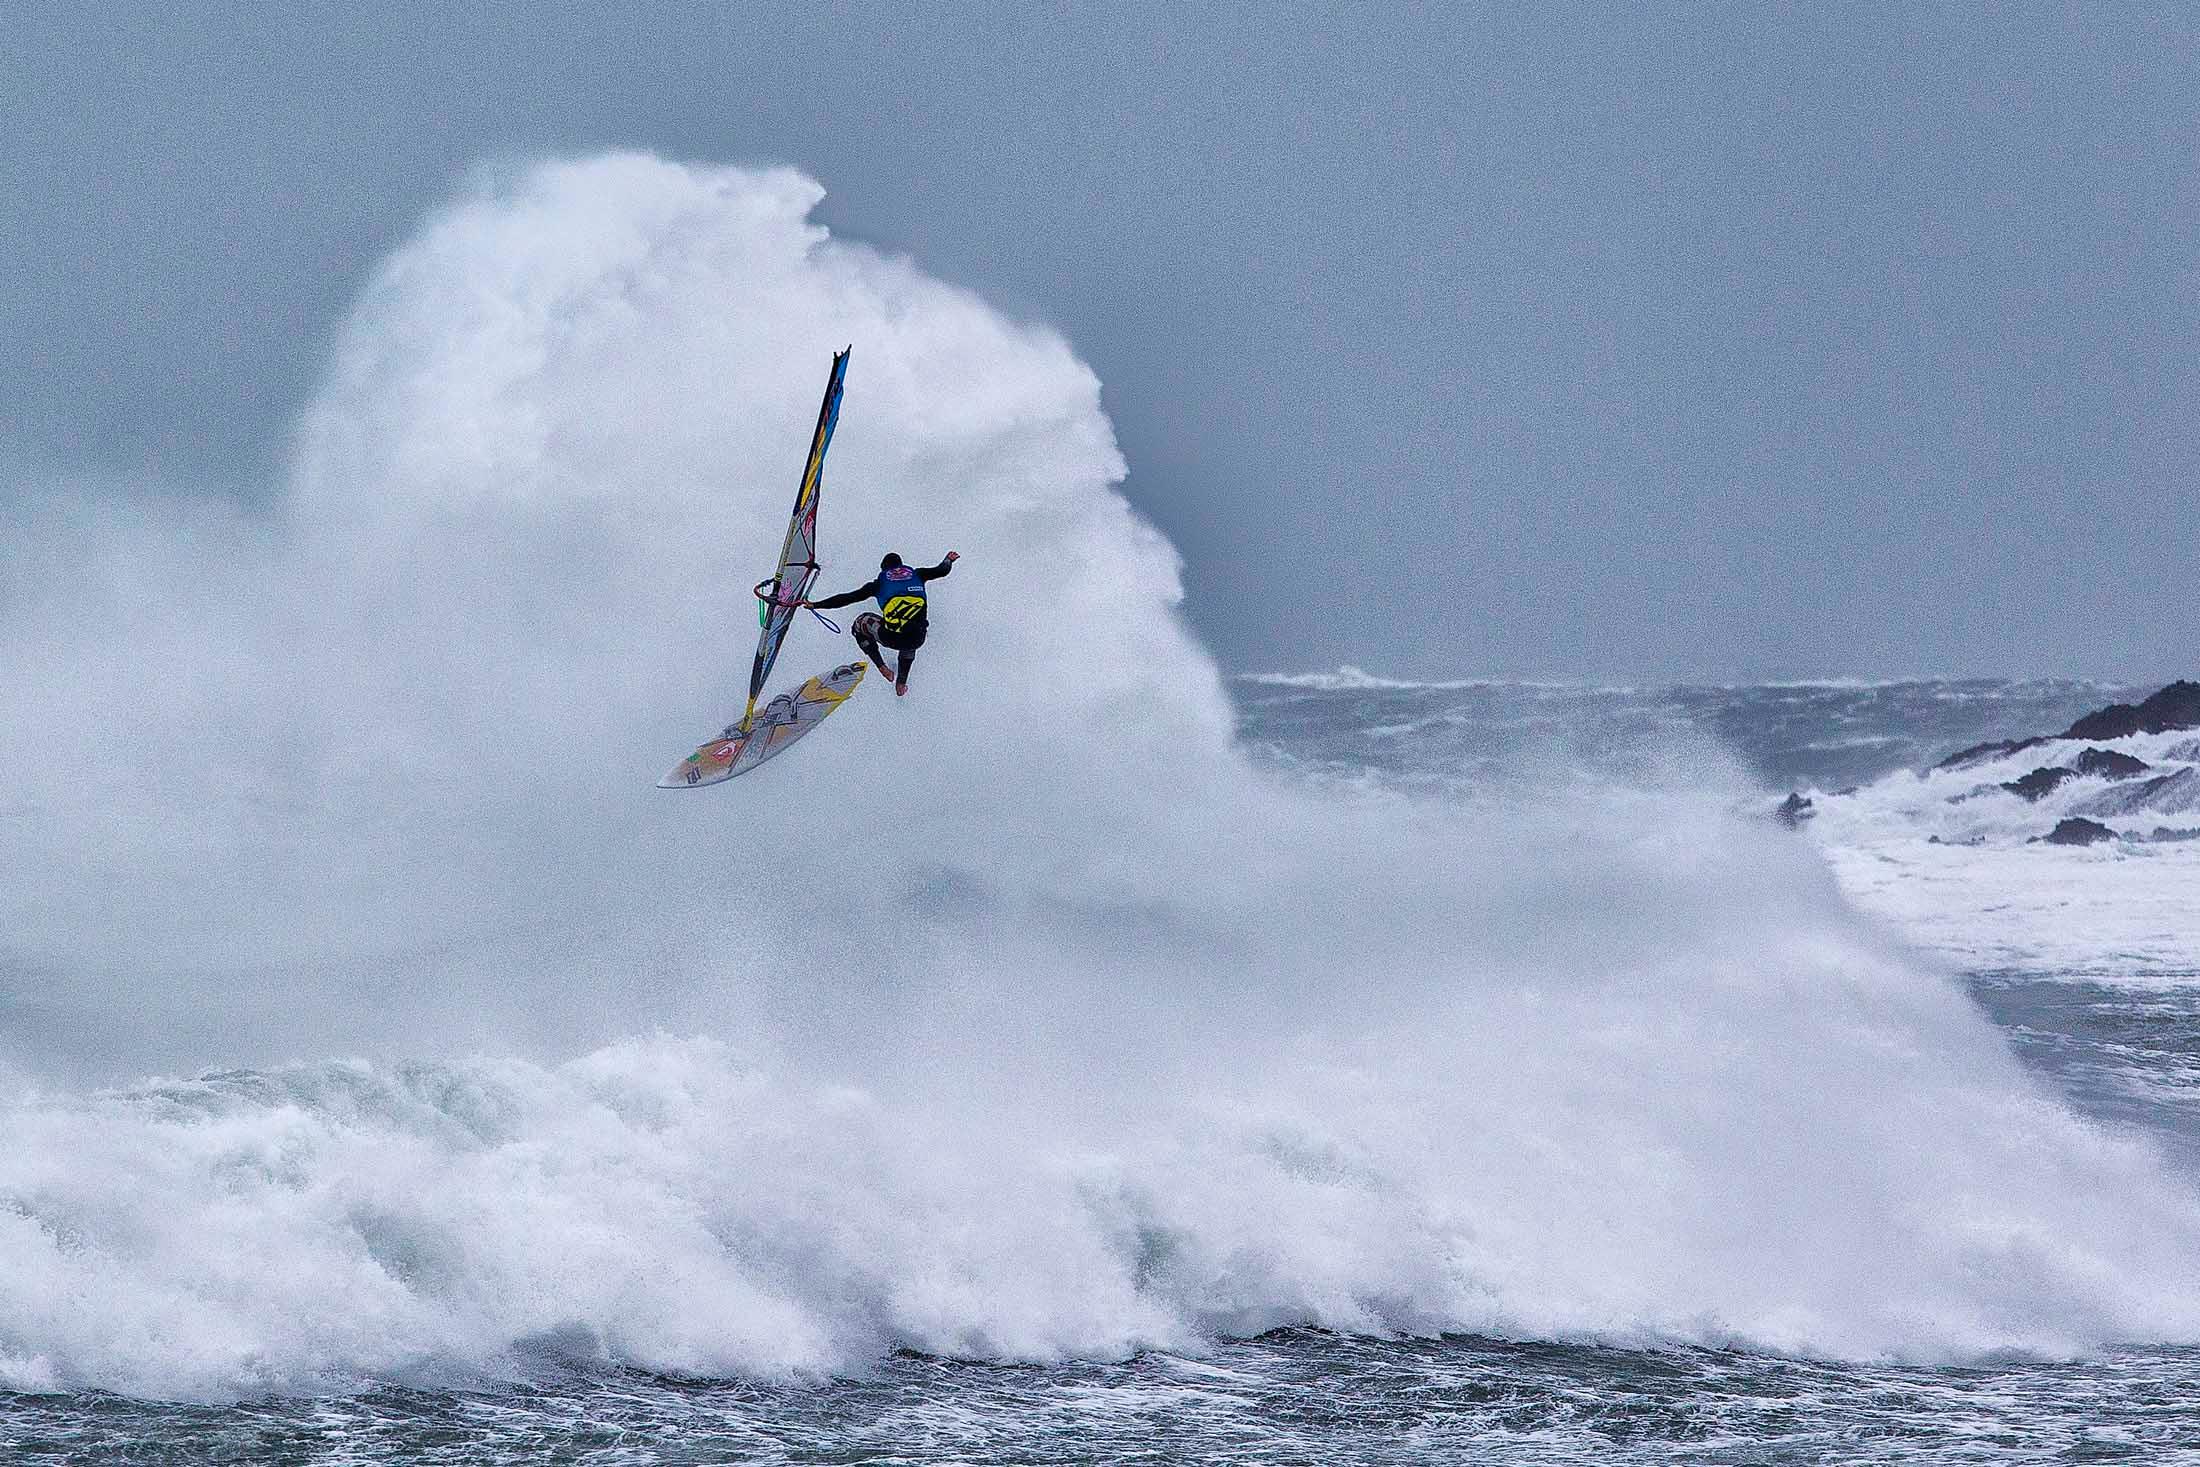 Red Bull Storm Chase - Mission 1, Ireland completed. - Naish.com